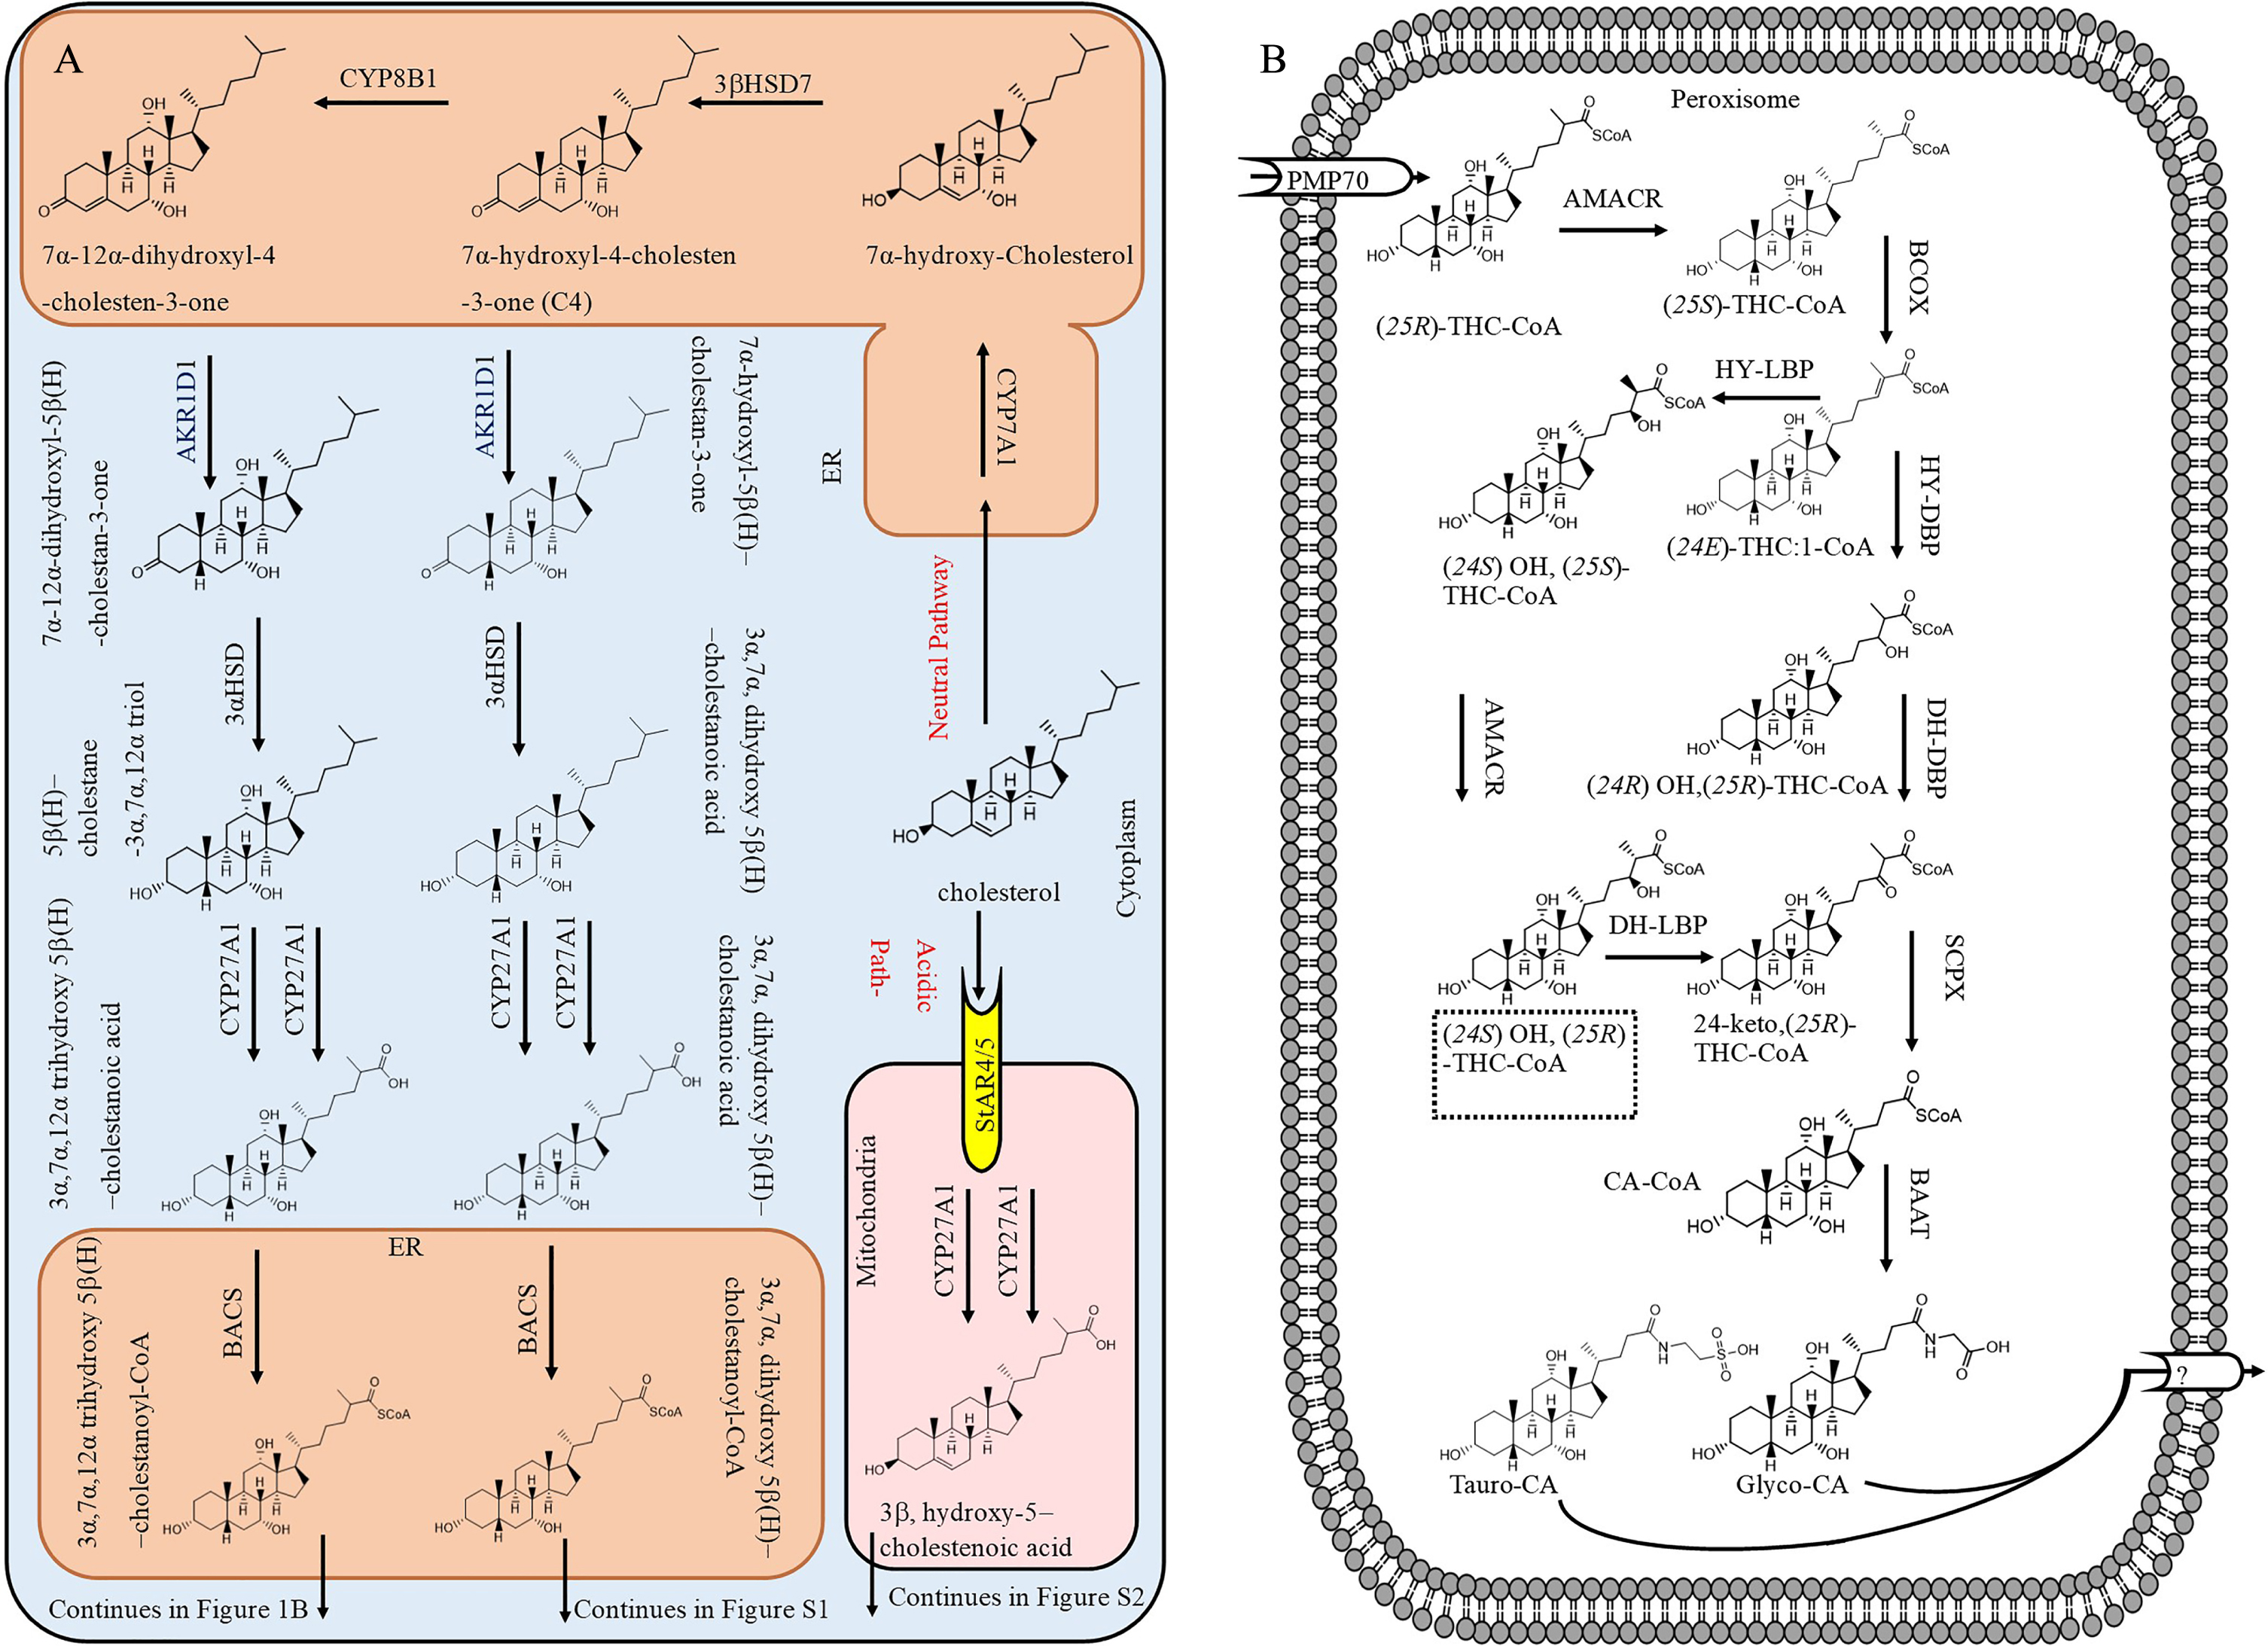 The biosynthesis of bile acids from cholesterol by the neutral or acidic pathway A) in the cytoplasm and B) completion in peroxisomes (only for biosynthesis of conjugated cholic acid).